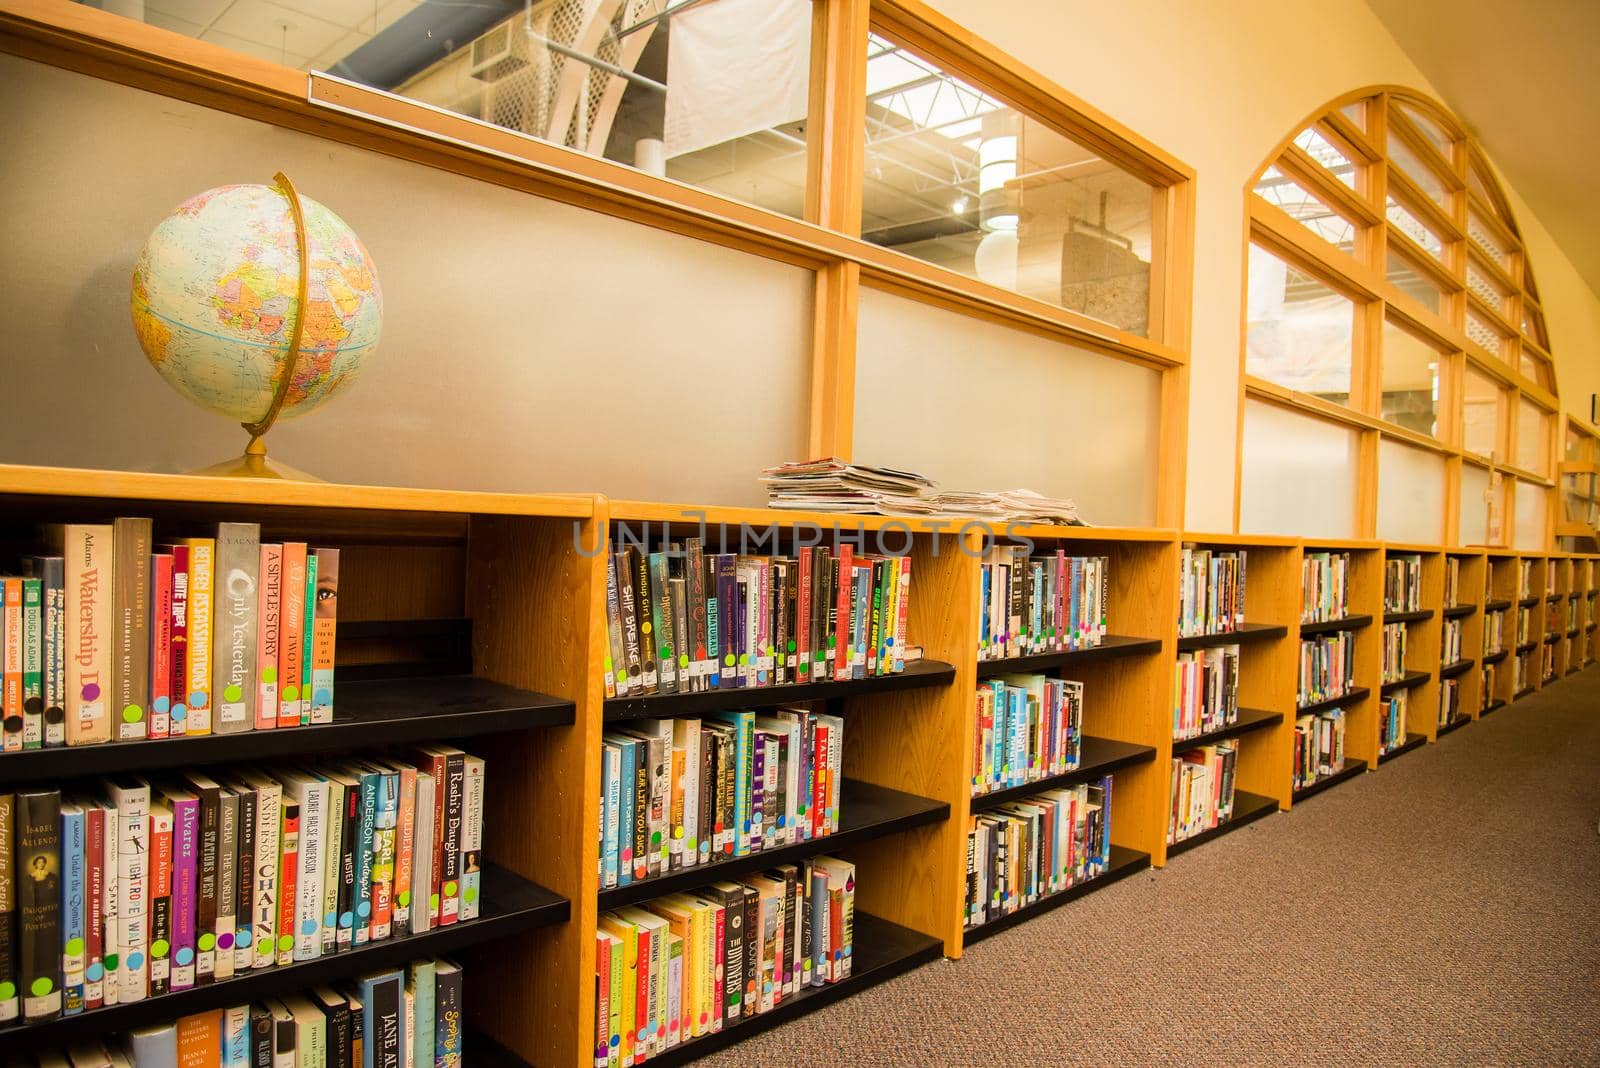 Colorful books in a school library with a globe sitting on the top shelf. Learning setting